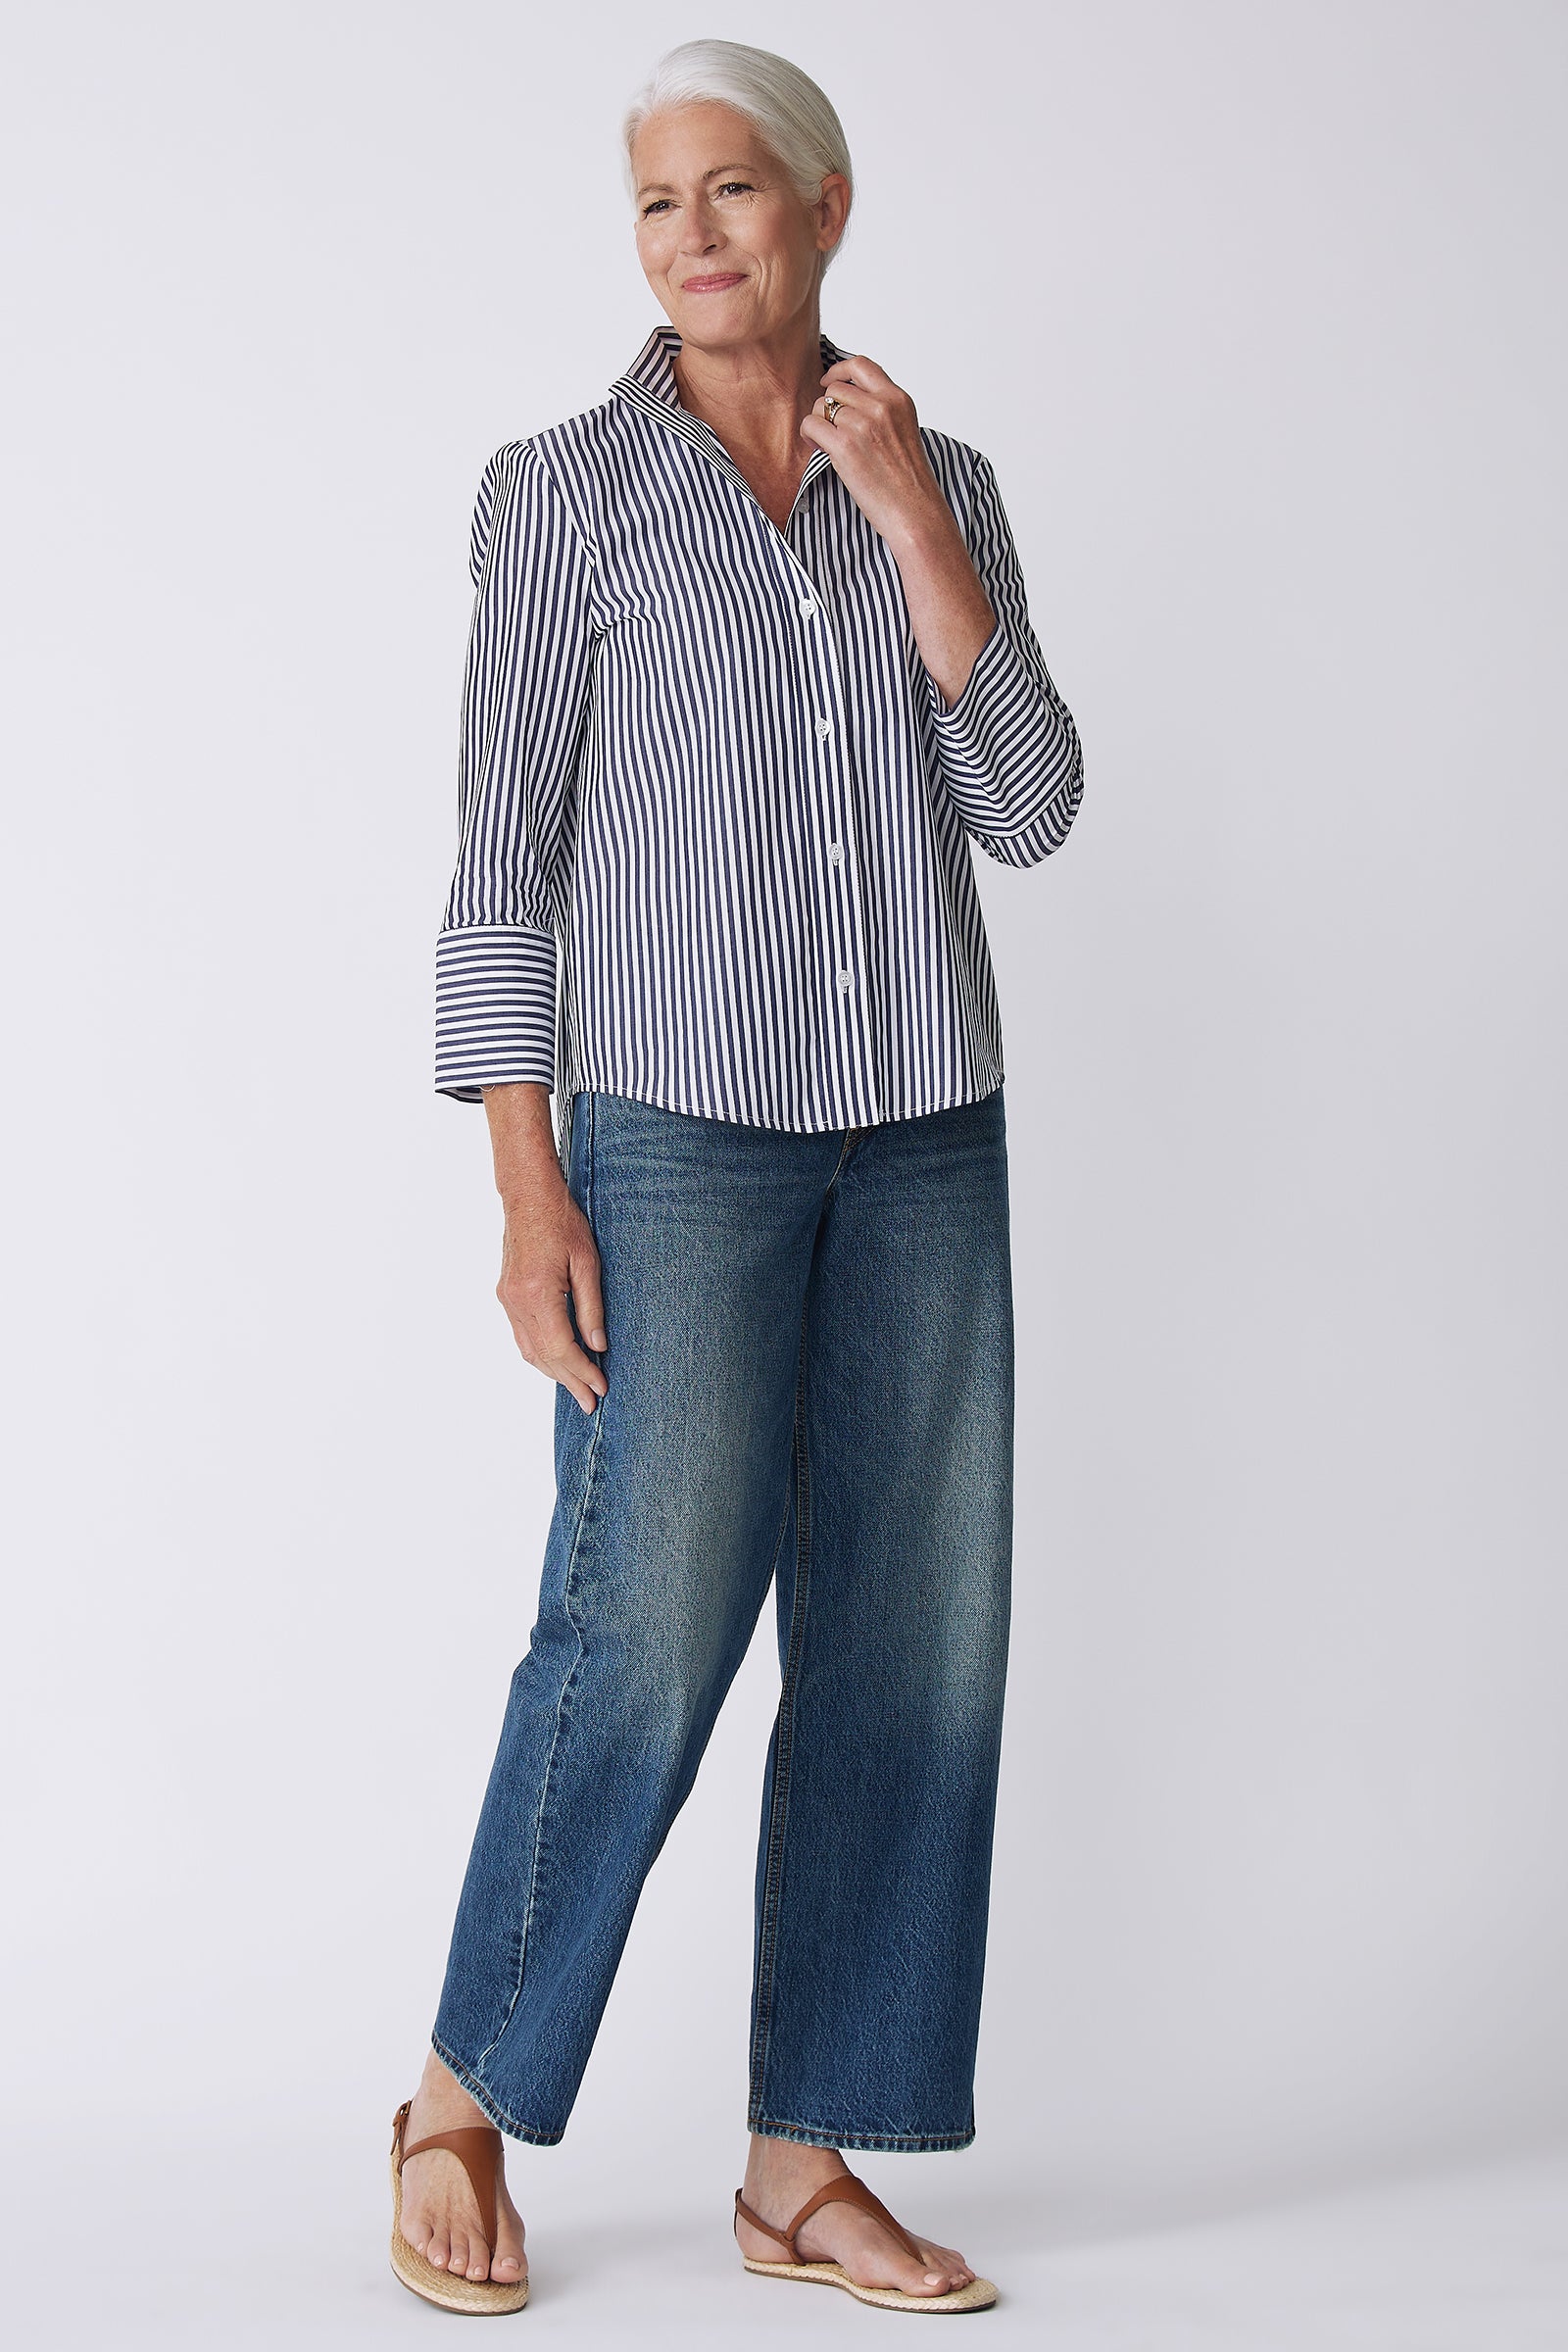 Kal Rieman Greta Placket Front Shirt in Indigo Stripe on Model Side View full with hand on collar